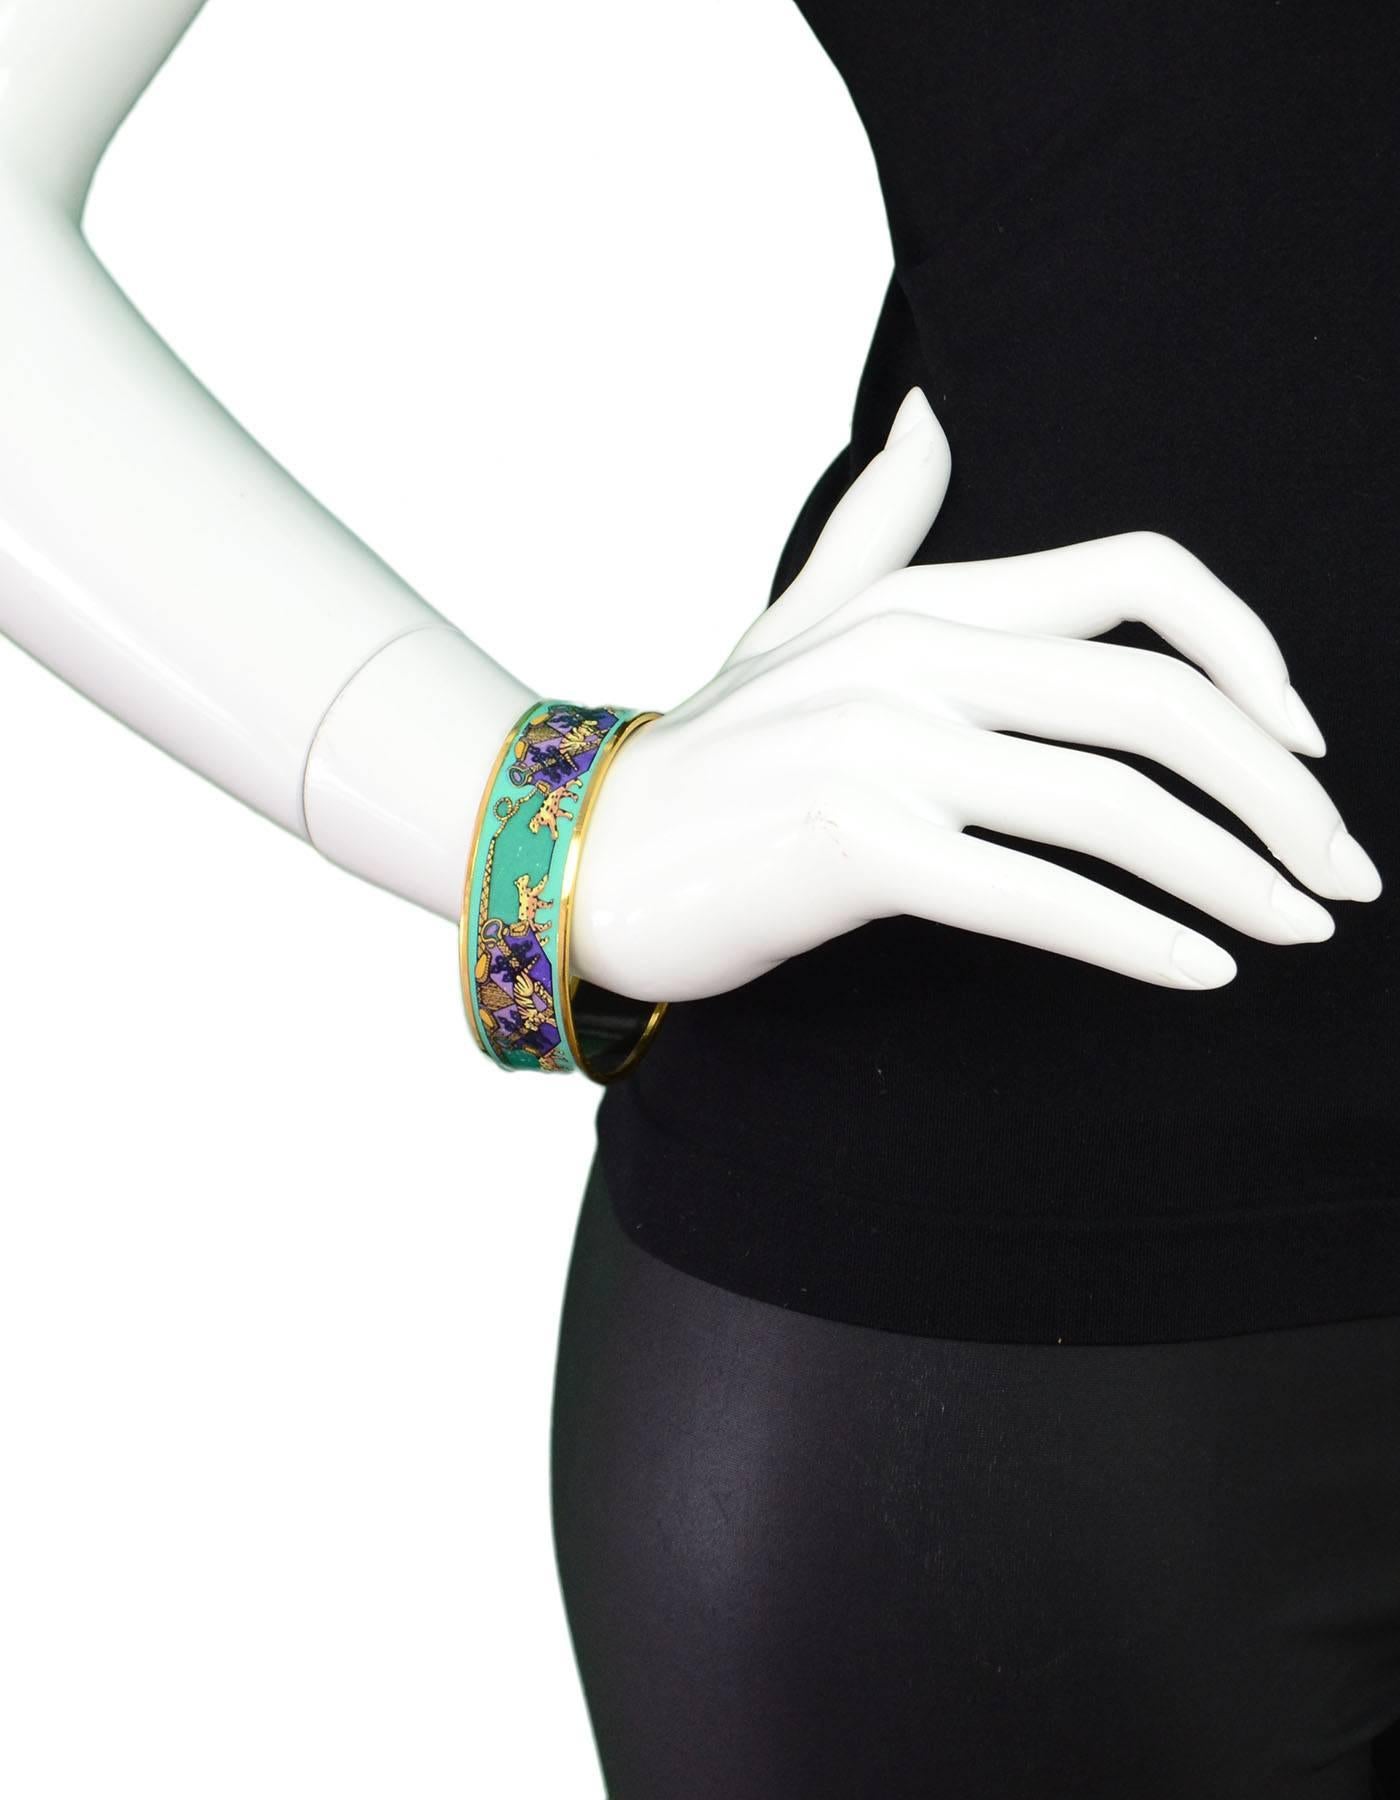 Hermes Turquoise and Purple Enamel Bracelet Sz 70
Features leopard and tiger design

Made In: Austria
Color: Turquoise, green, purple
Hardware: Goldtone
Materials: Enamel and metal
Closure: None
Stamp: Made in Austria Hermes Paris
Retail Price: $550